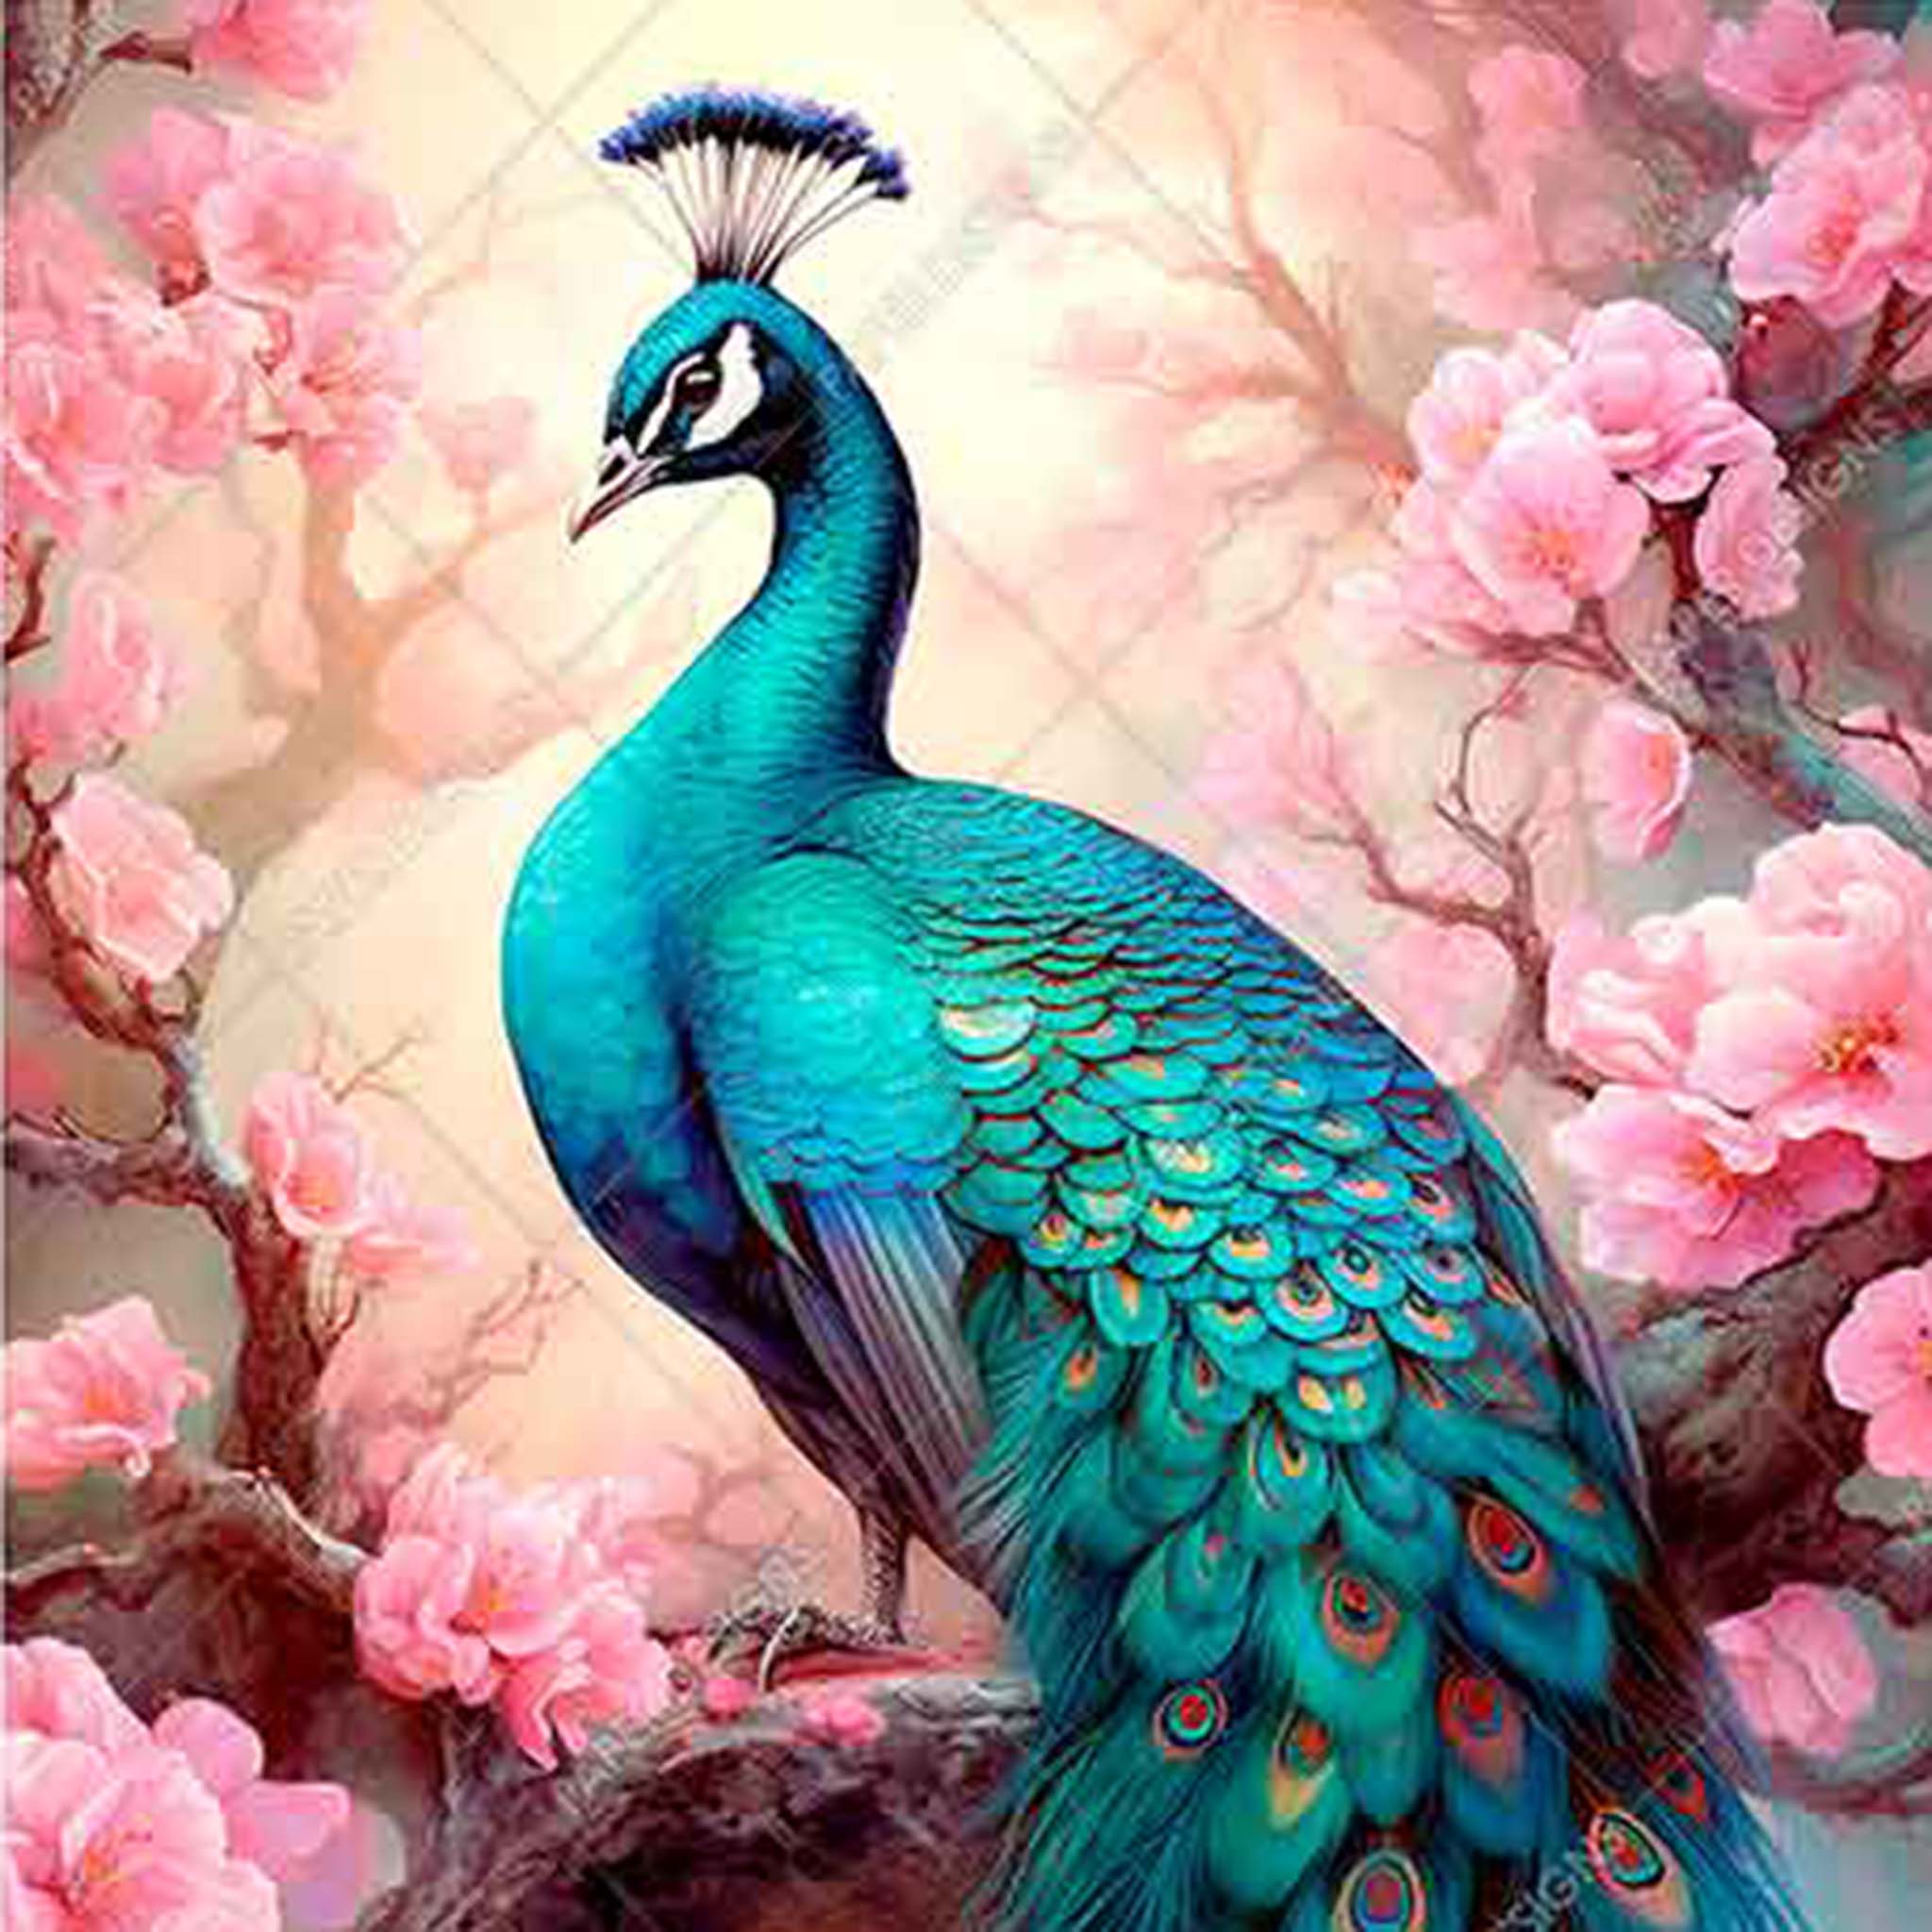 Close-up of an A4 rice paper design that features a jewel toned peacock perched among pink flowering branches.